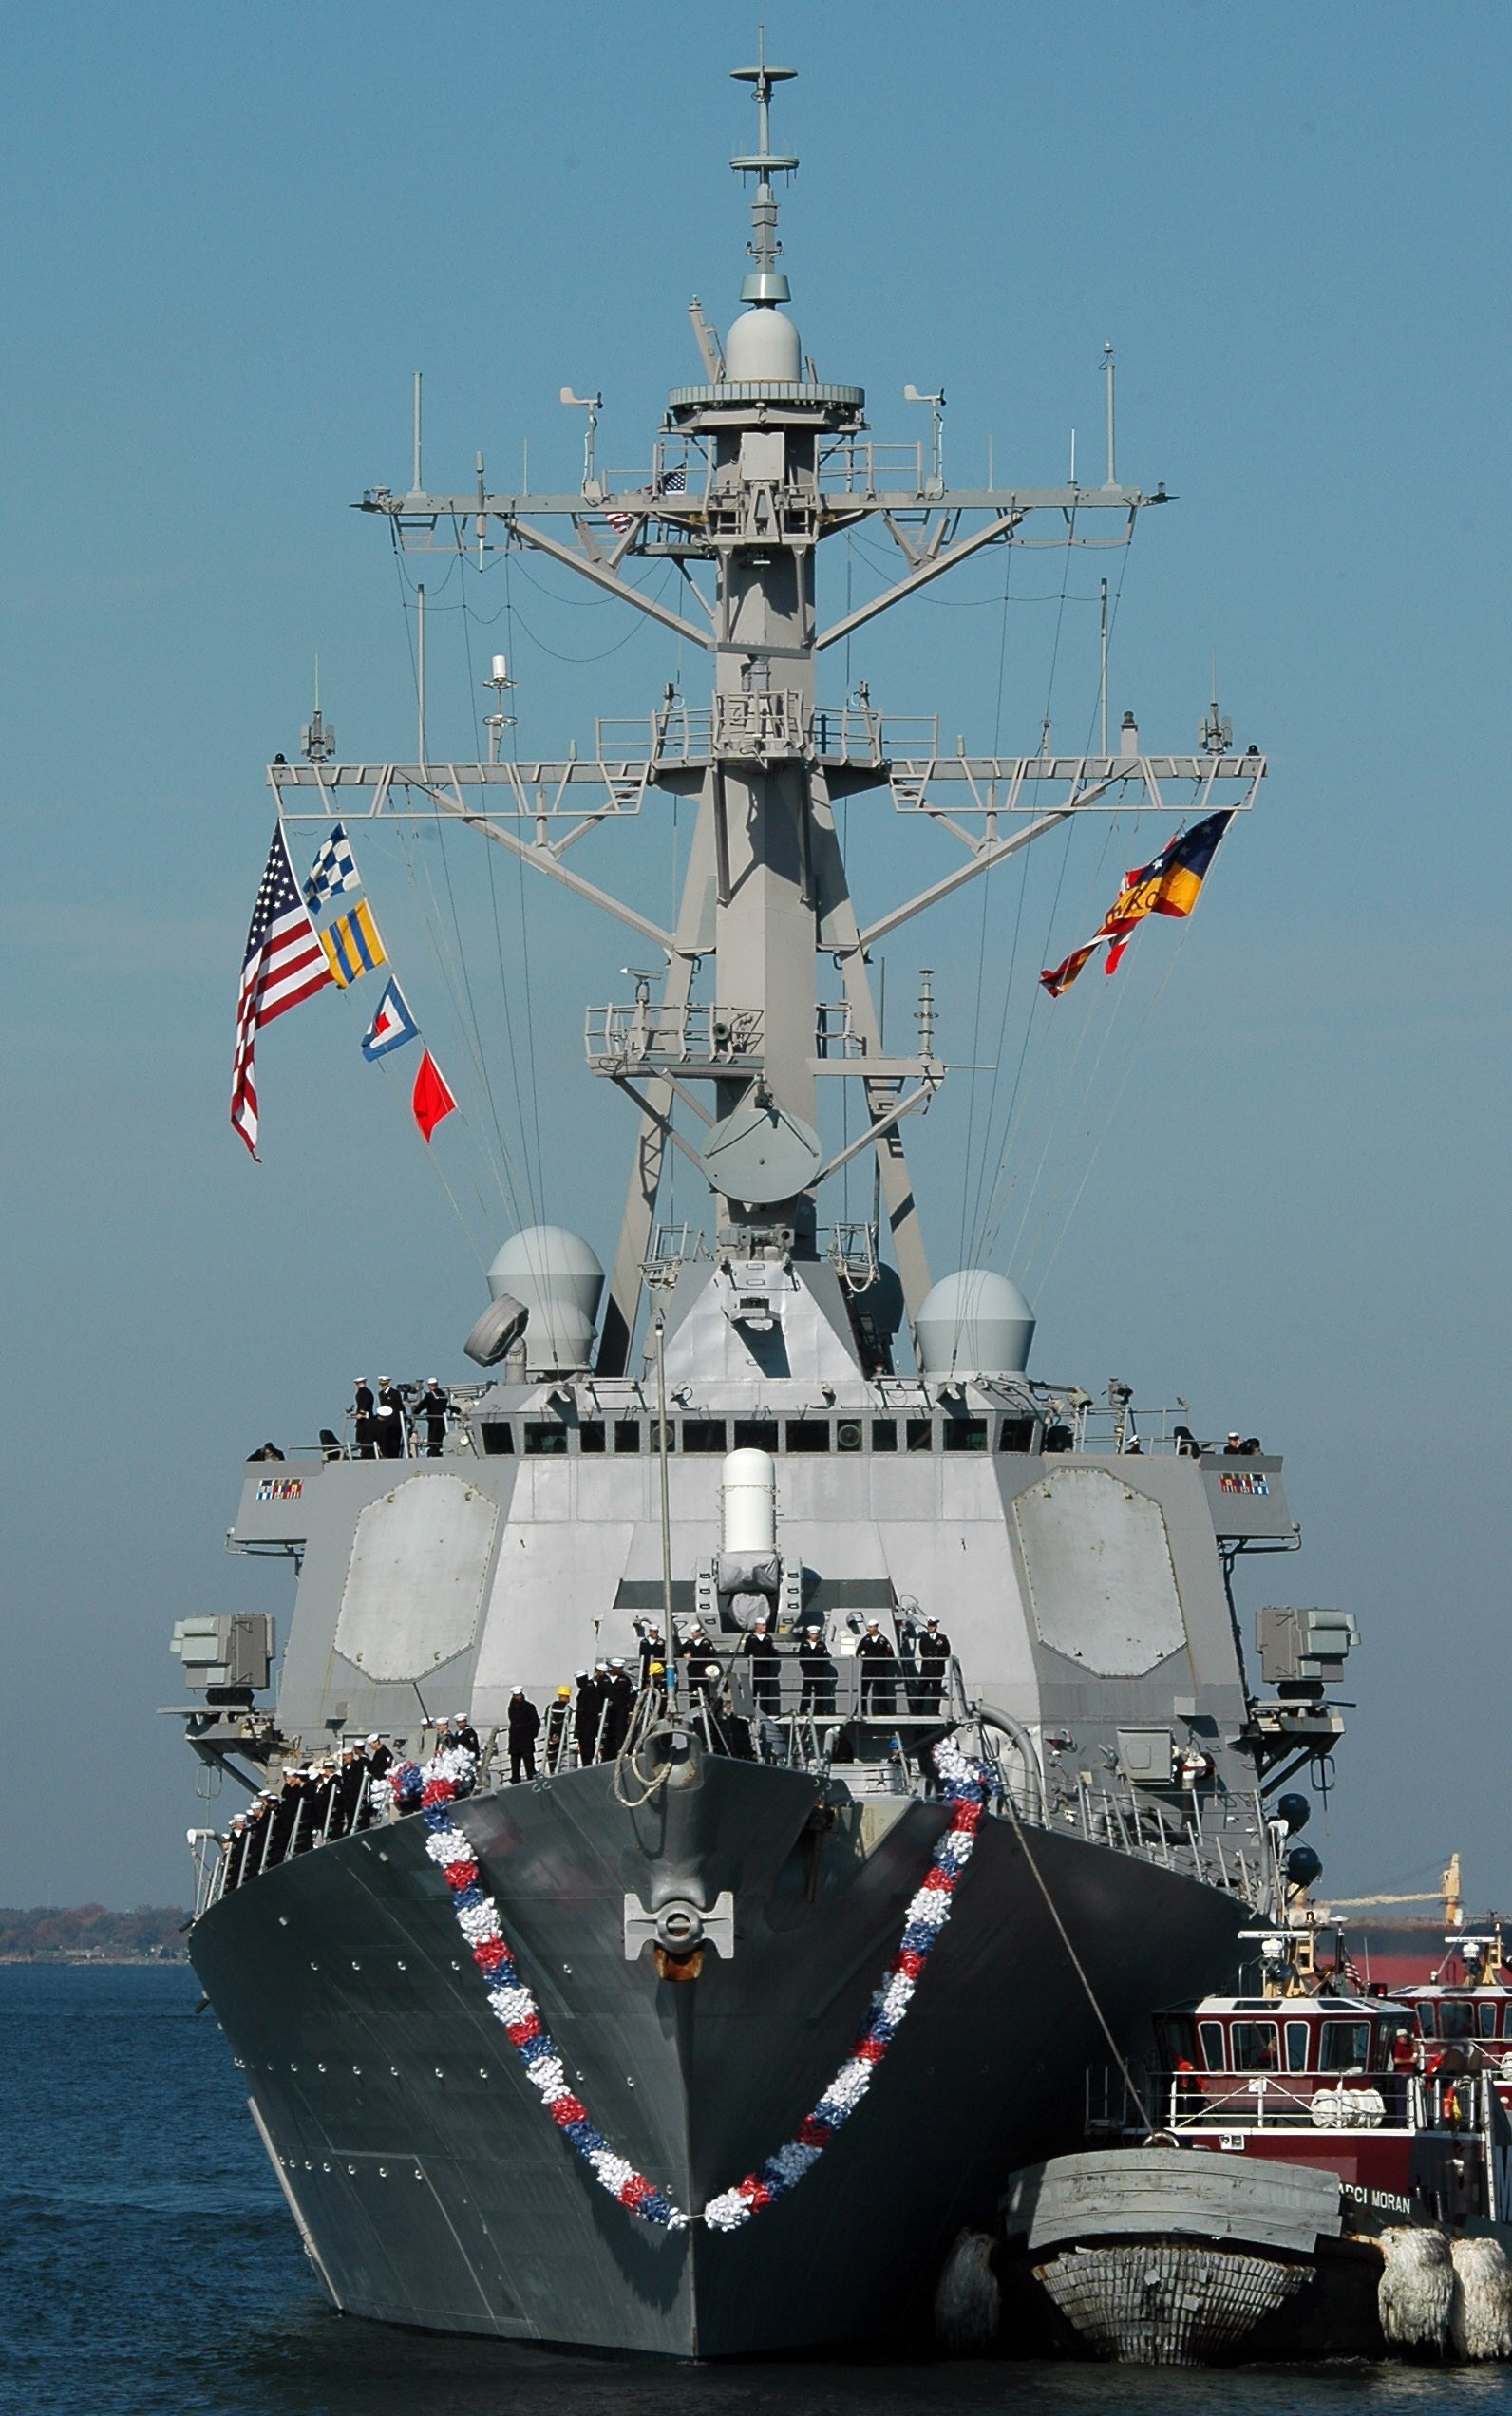 ddg-71 uss ross guided missile destroyer arleigh burke class aegis bmd 93